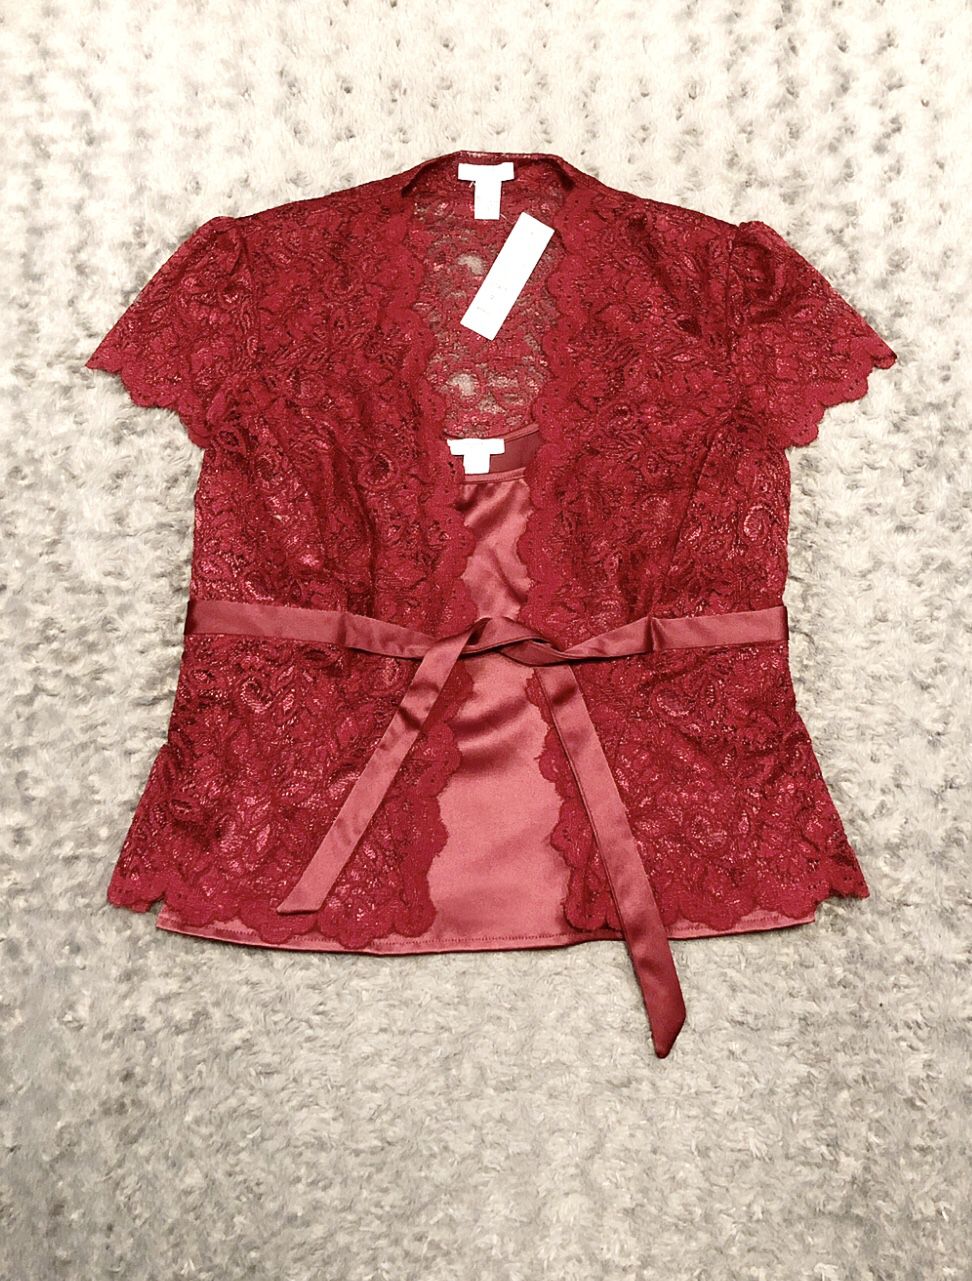 New! Cache 2 Piece Lace Camisole paid $158 size 12 Burgundy Top Blouse Tie Waist very Stylish! Look great with jeans or a long ball gown skirt!